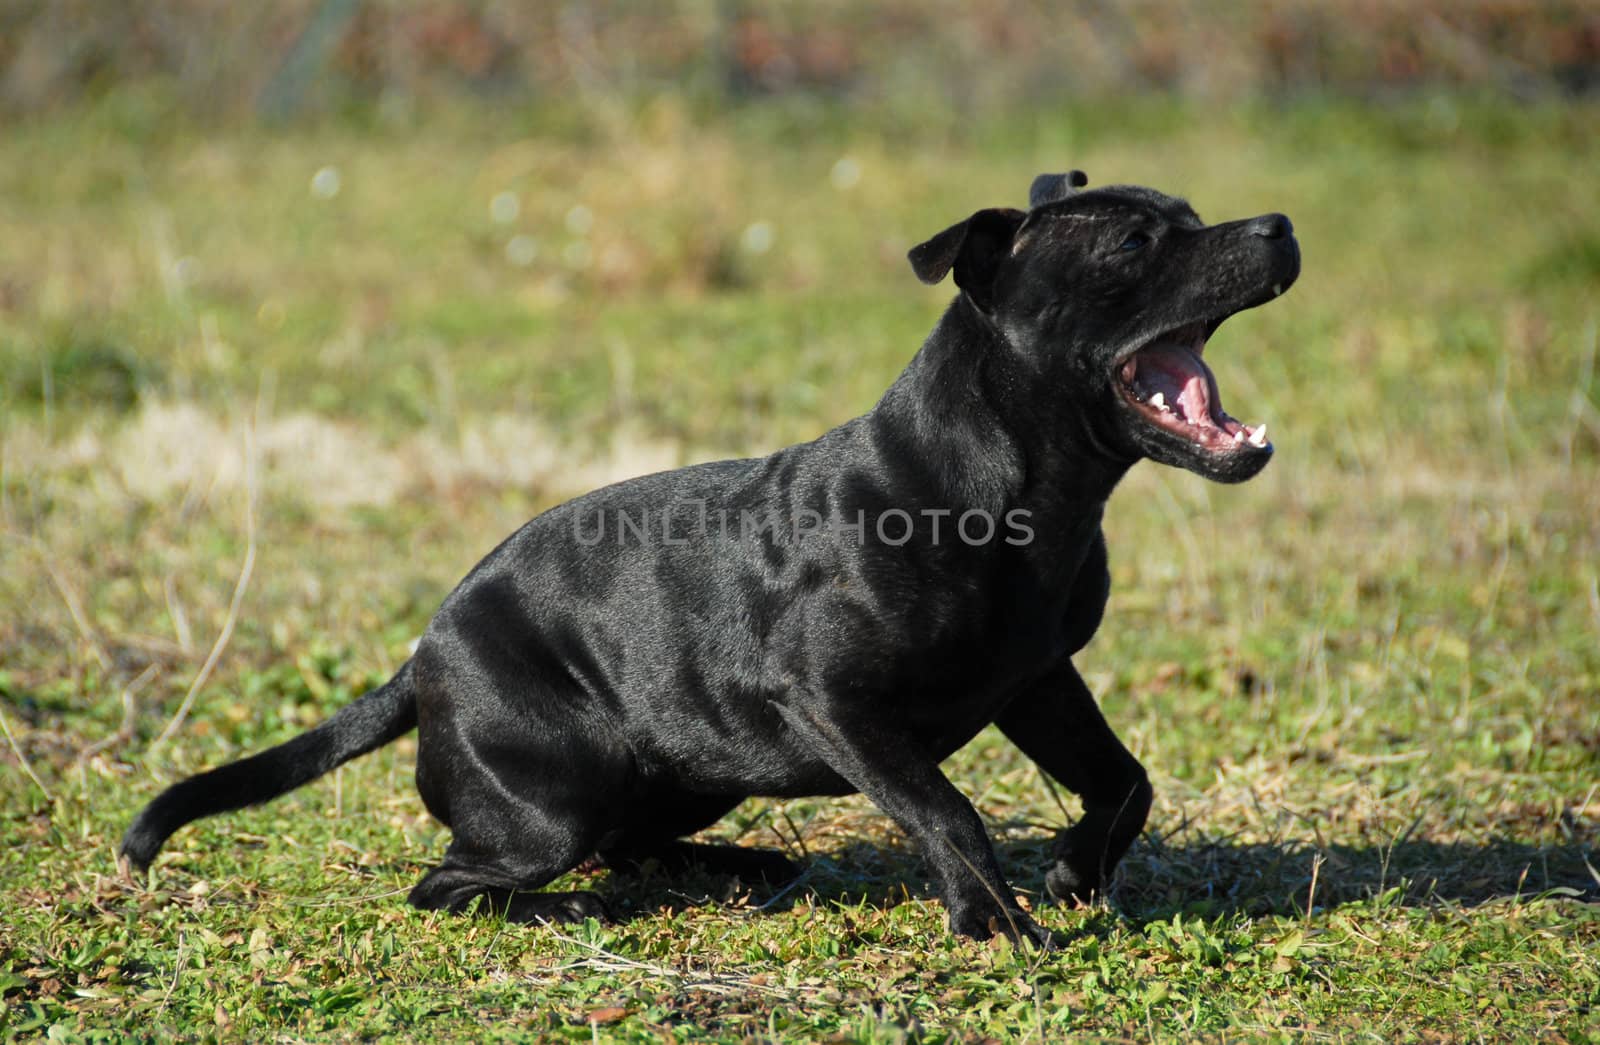 purebred staffordshire bull terrier yawning in a field